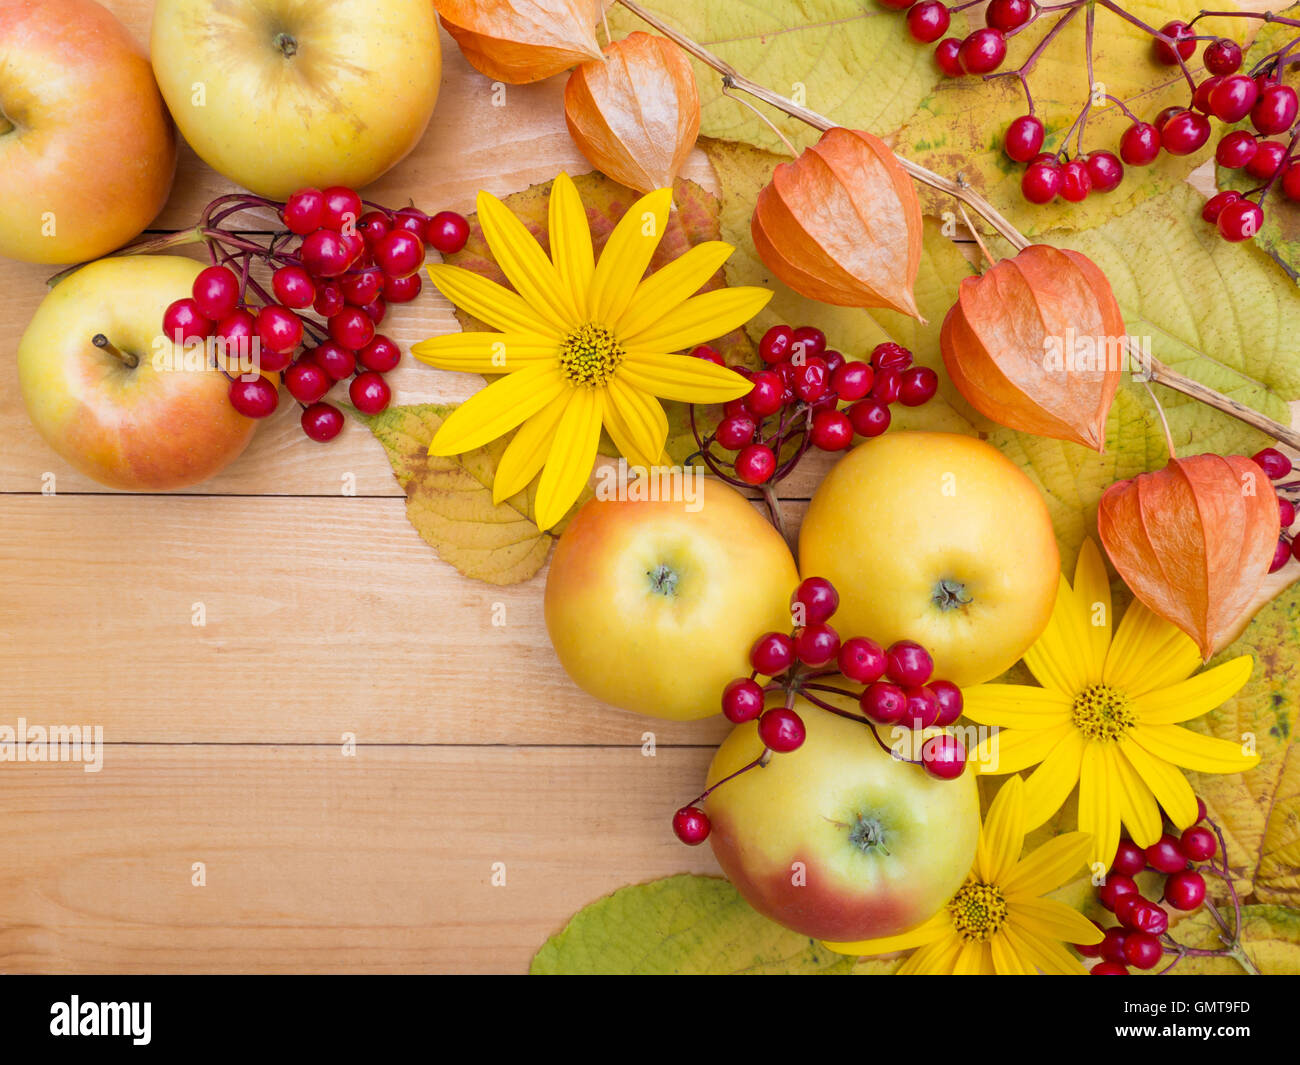 Apples, yellow flowers, physalis lanterns, berries and autumn leaves on the wooden planks background Stock Photo